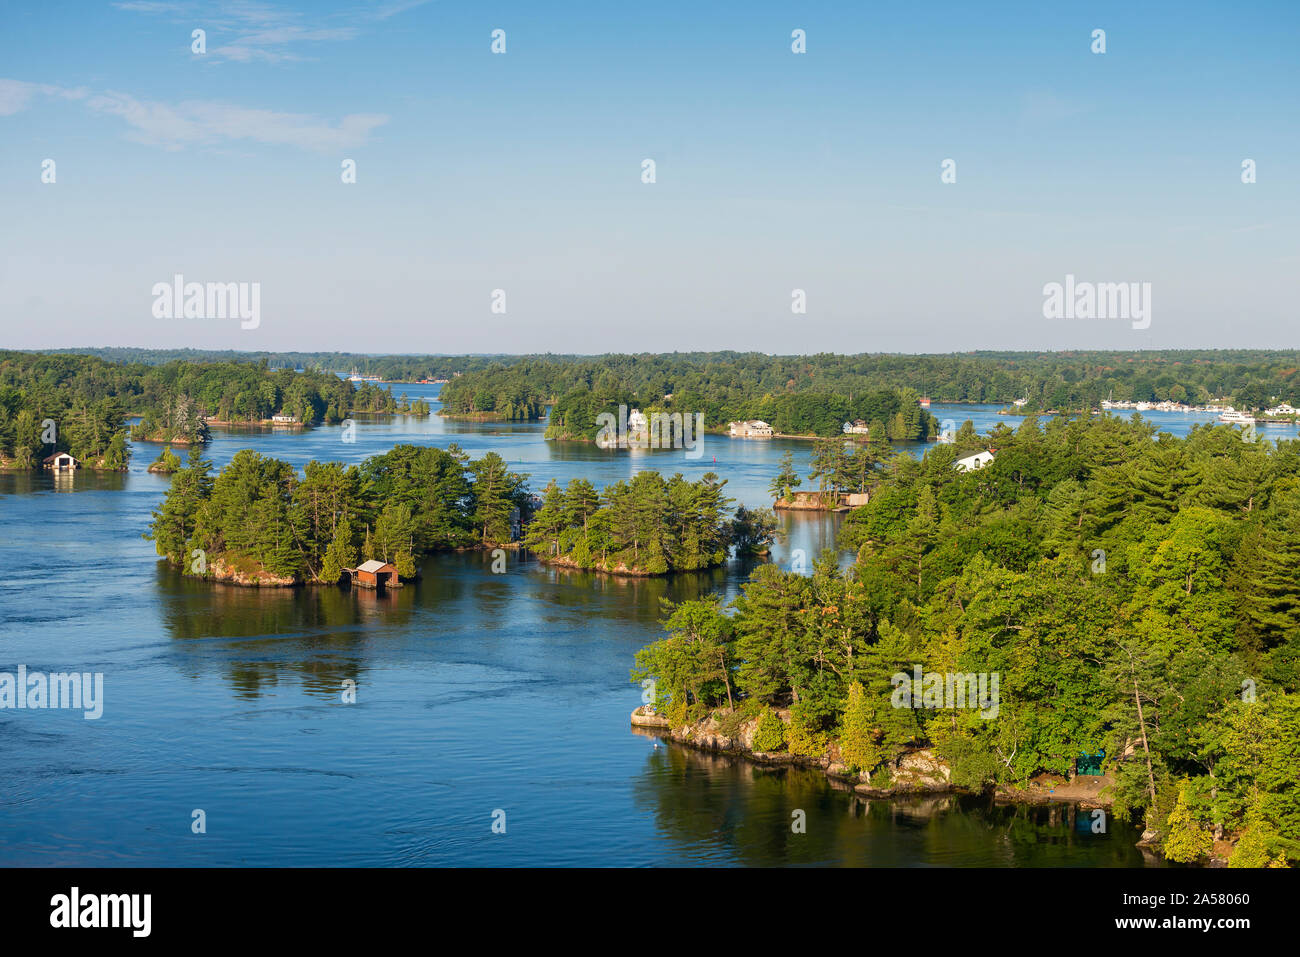 Cottages in Thousand Islands region of Ontario, Canada Stock Photo